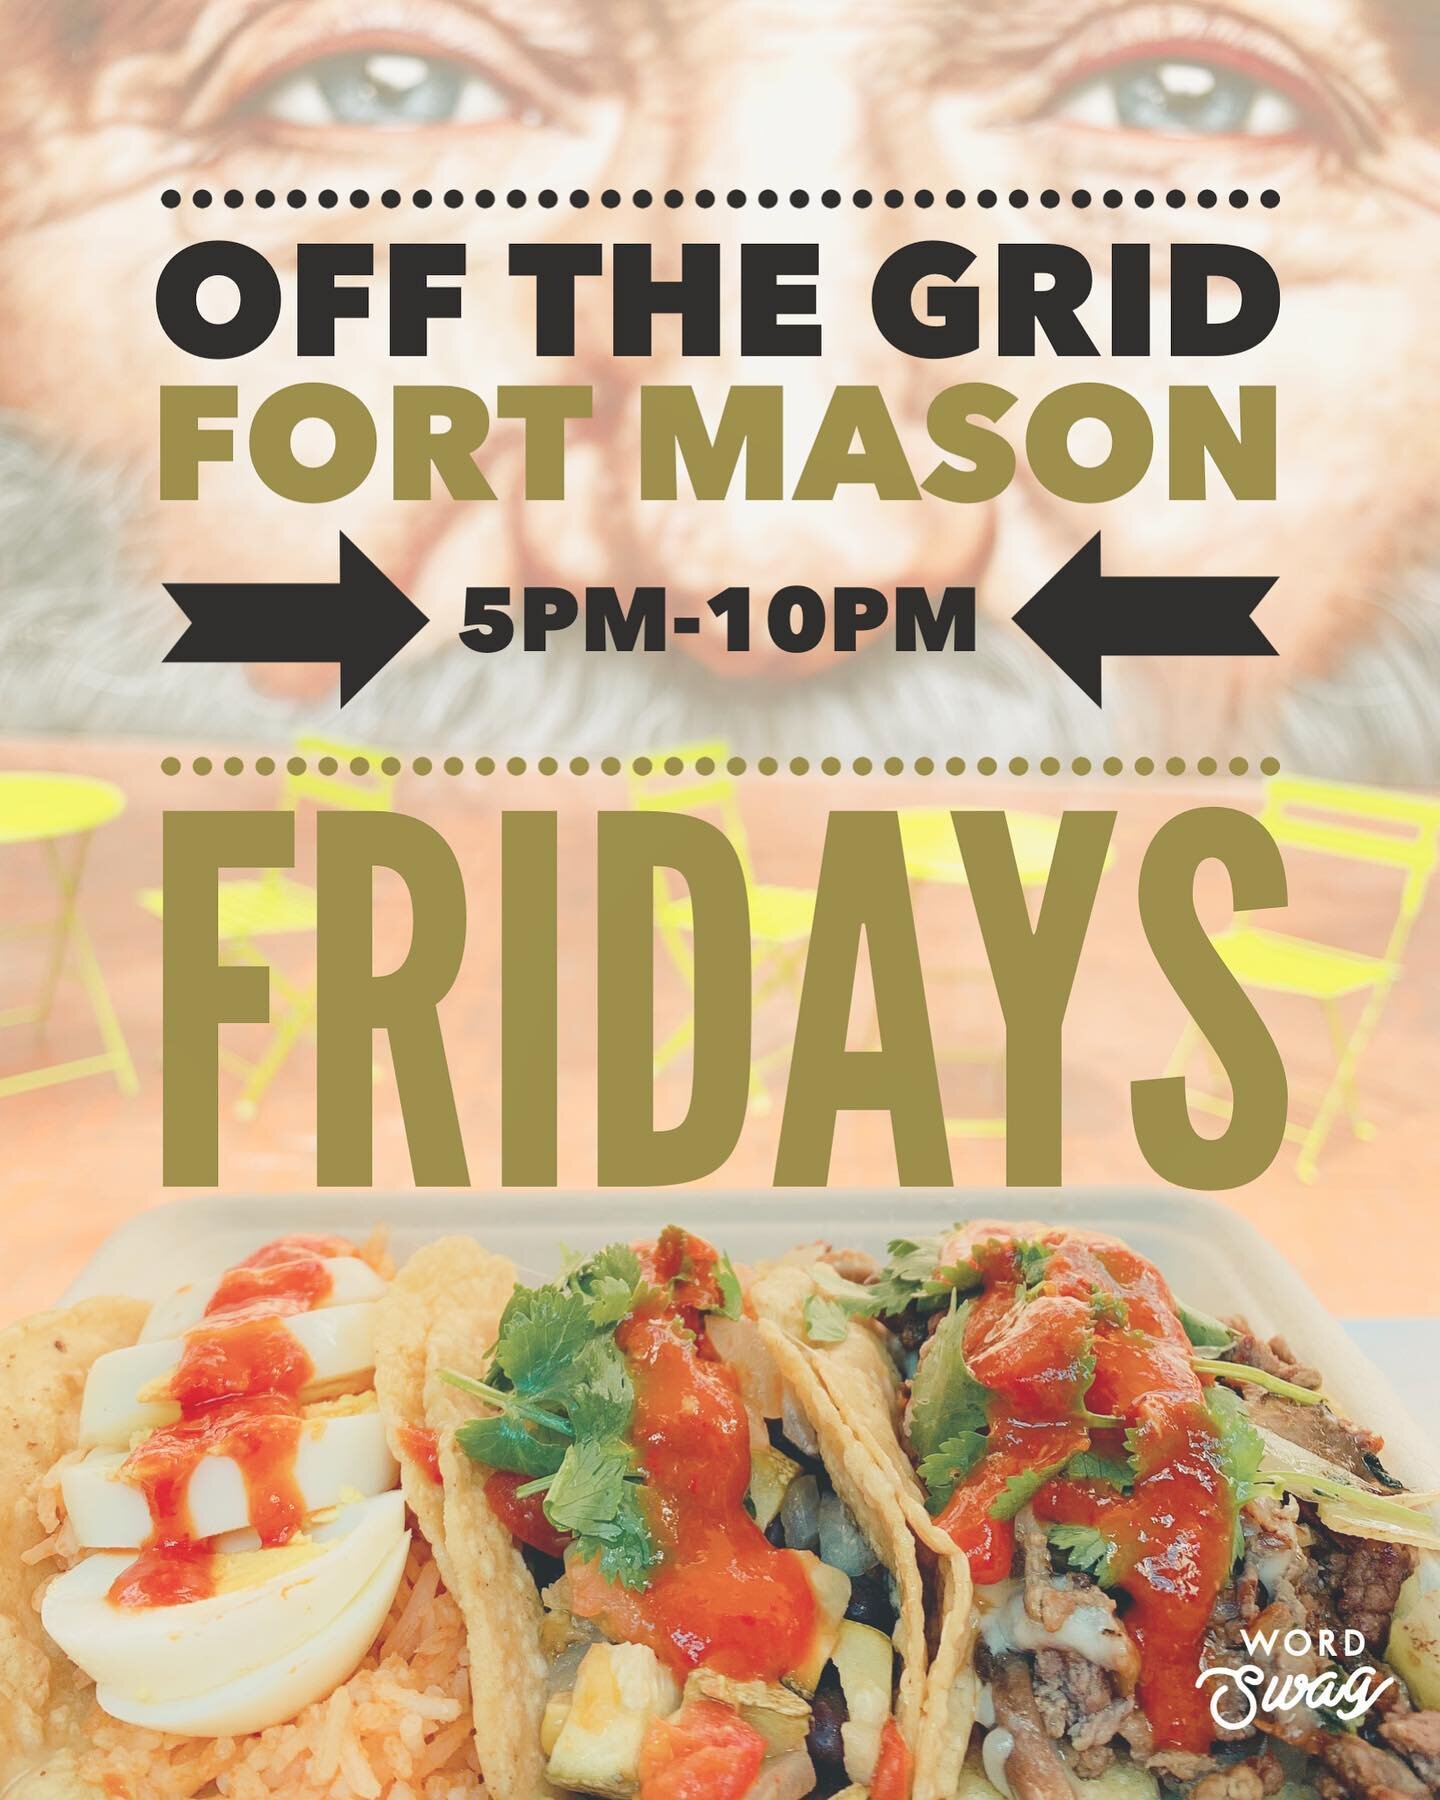 All you need is LOVE* &amp; TACOS ... .
*Love is optional 🤤💕🌮✨
.
Come find our TACOS DE GUISADO TRUCK
.
@offthegridsf &mdash; Fort Mason 💜🌮
FRIDAYS
5pm-10pm